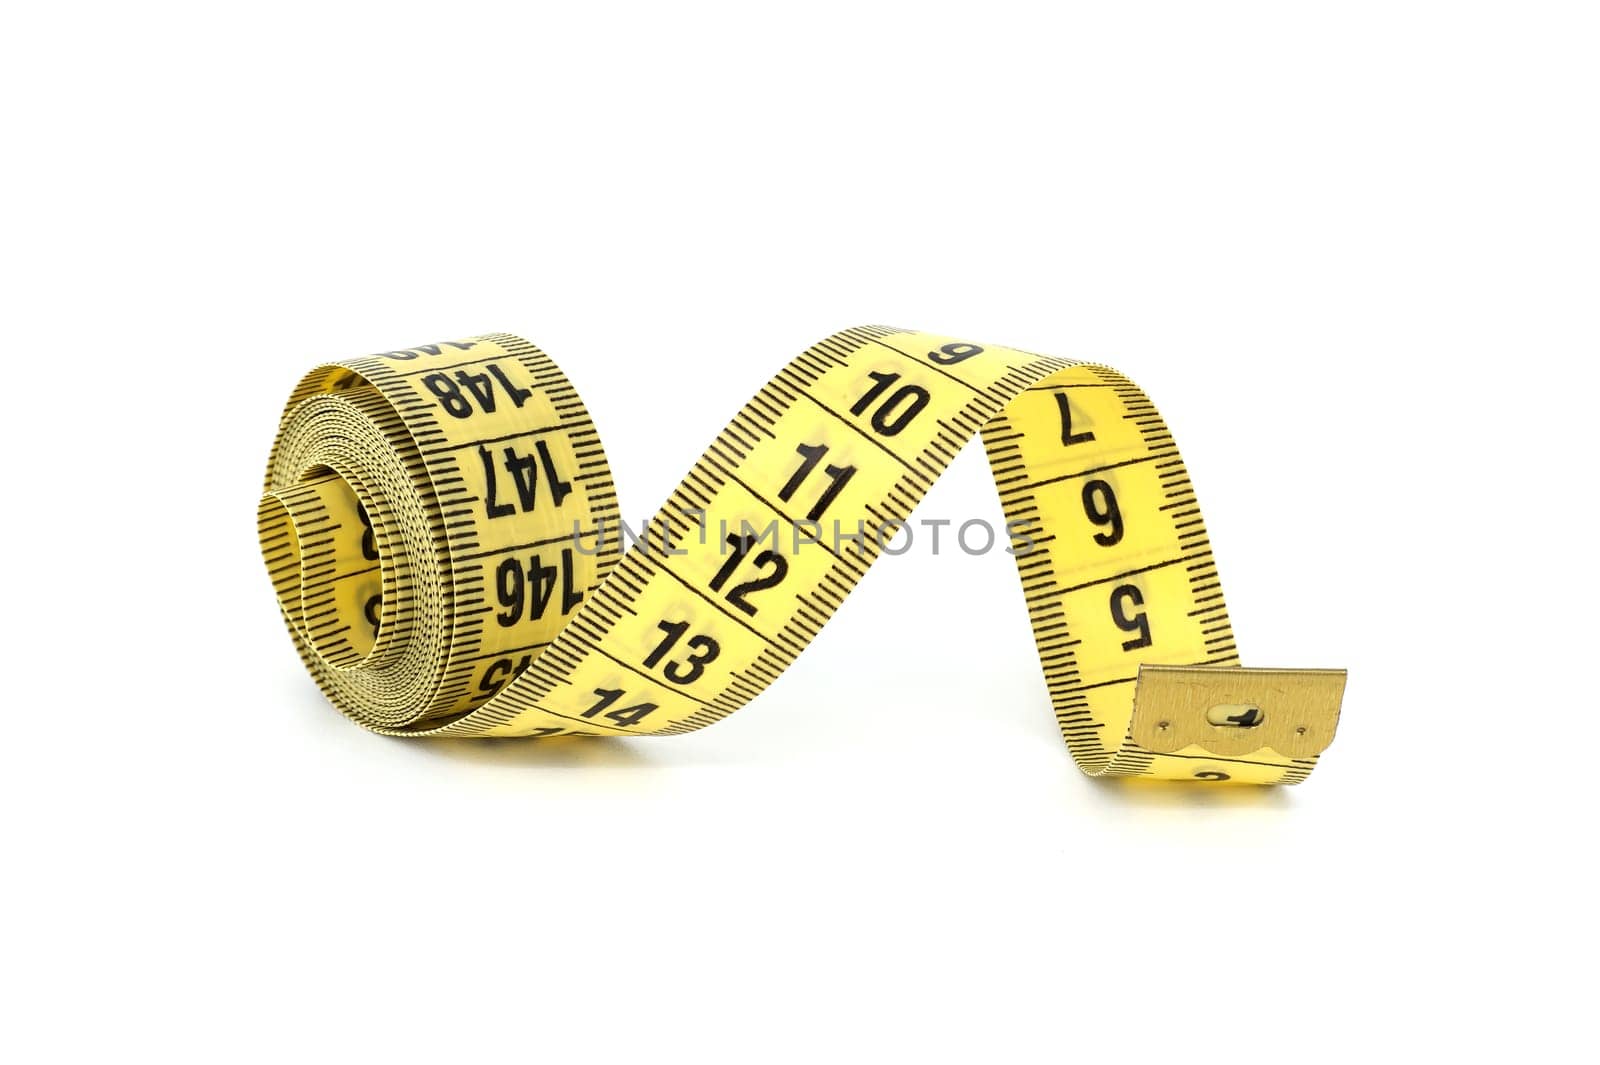 Yellow tape measure spirals creates a visual impression of motion isolated on white background